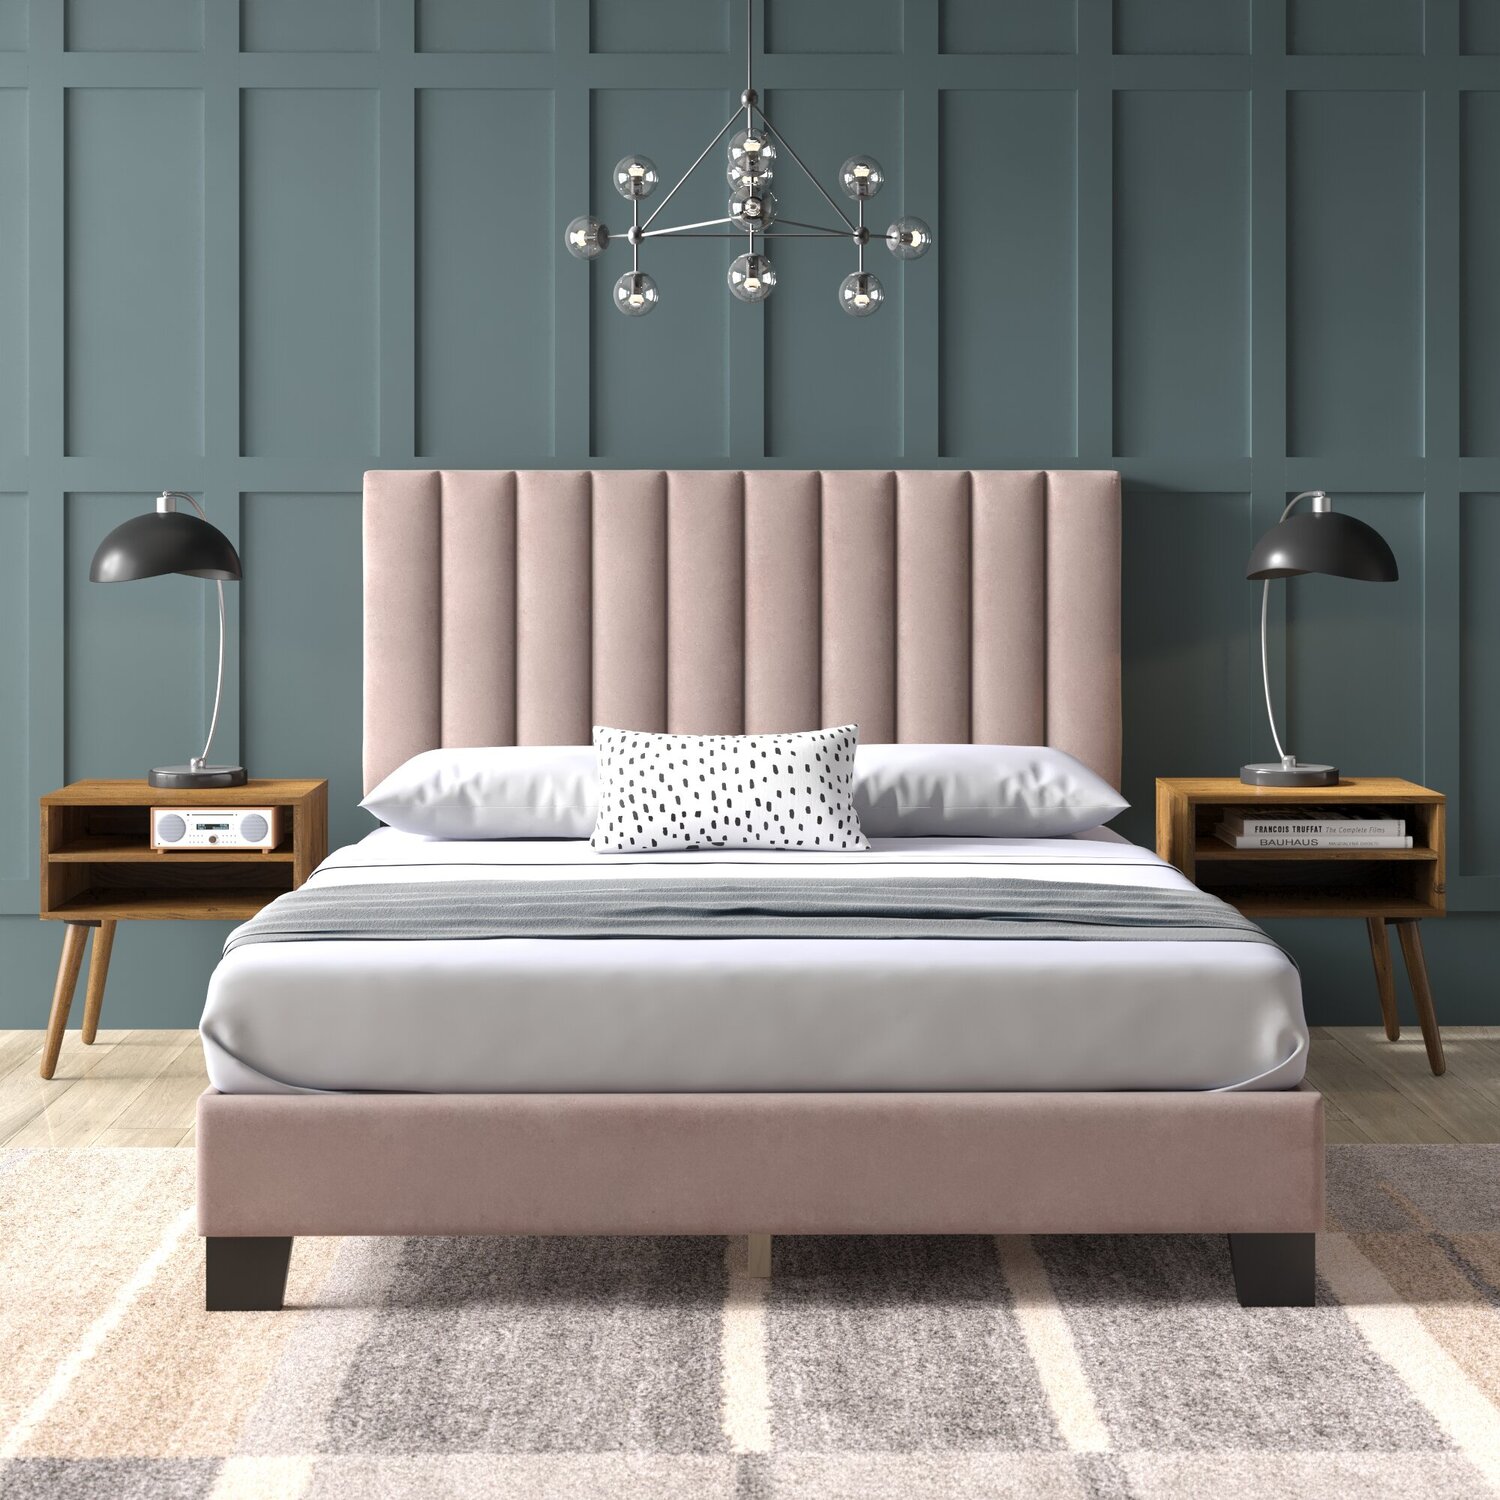 Picket House Furnishings Colbie Upholstered Queen Platform Bed With Nightstands in Blush - image 1 of 11